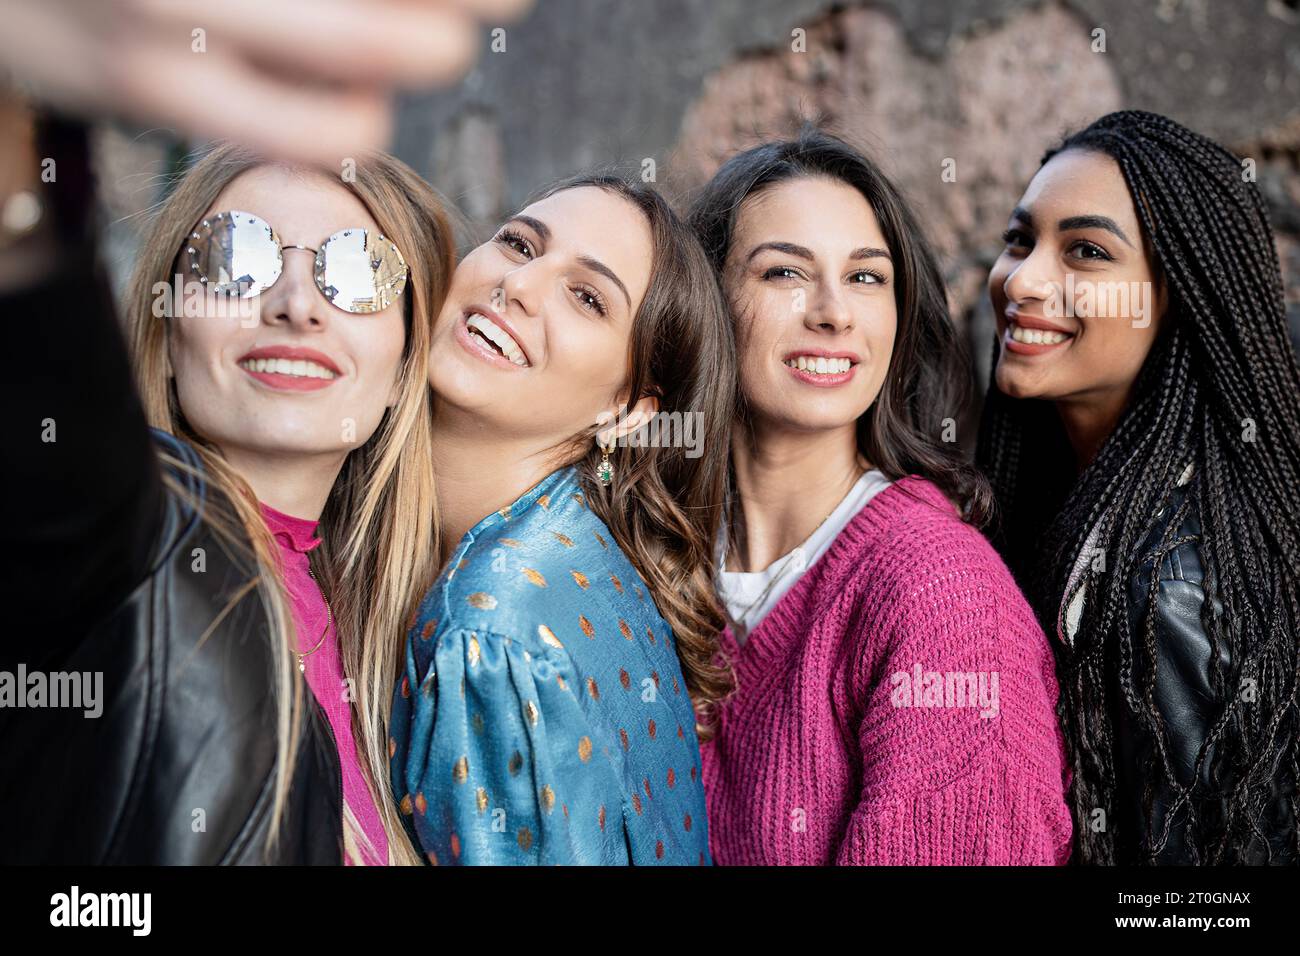 Four vibrant young women are capturing a joyful selfie moment in the historic part of the city, their smiles radiating happiness. Stock Photo